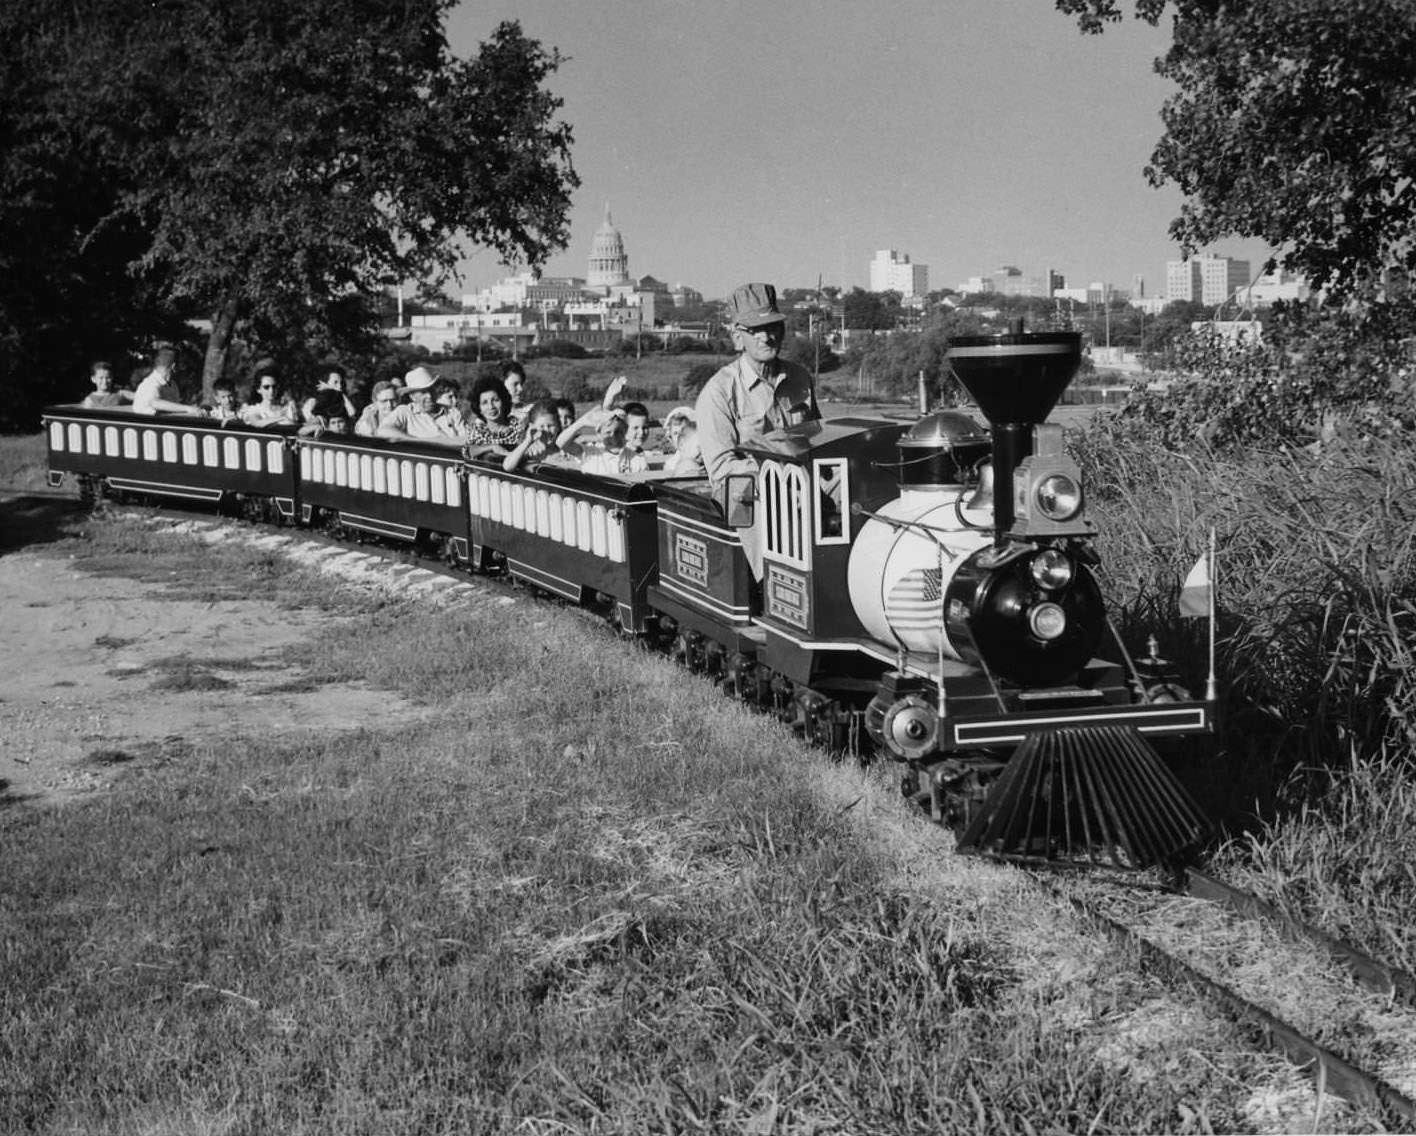 Children and parents riding the Zilker Zephyr miniature train through Zilker Park. Downtown Austin and the Capitol building are visible in the background, 1960s